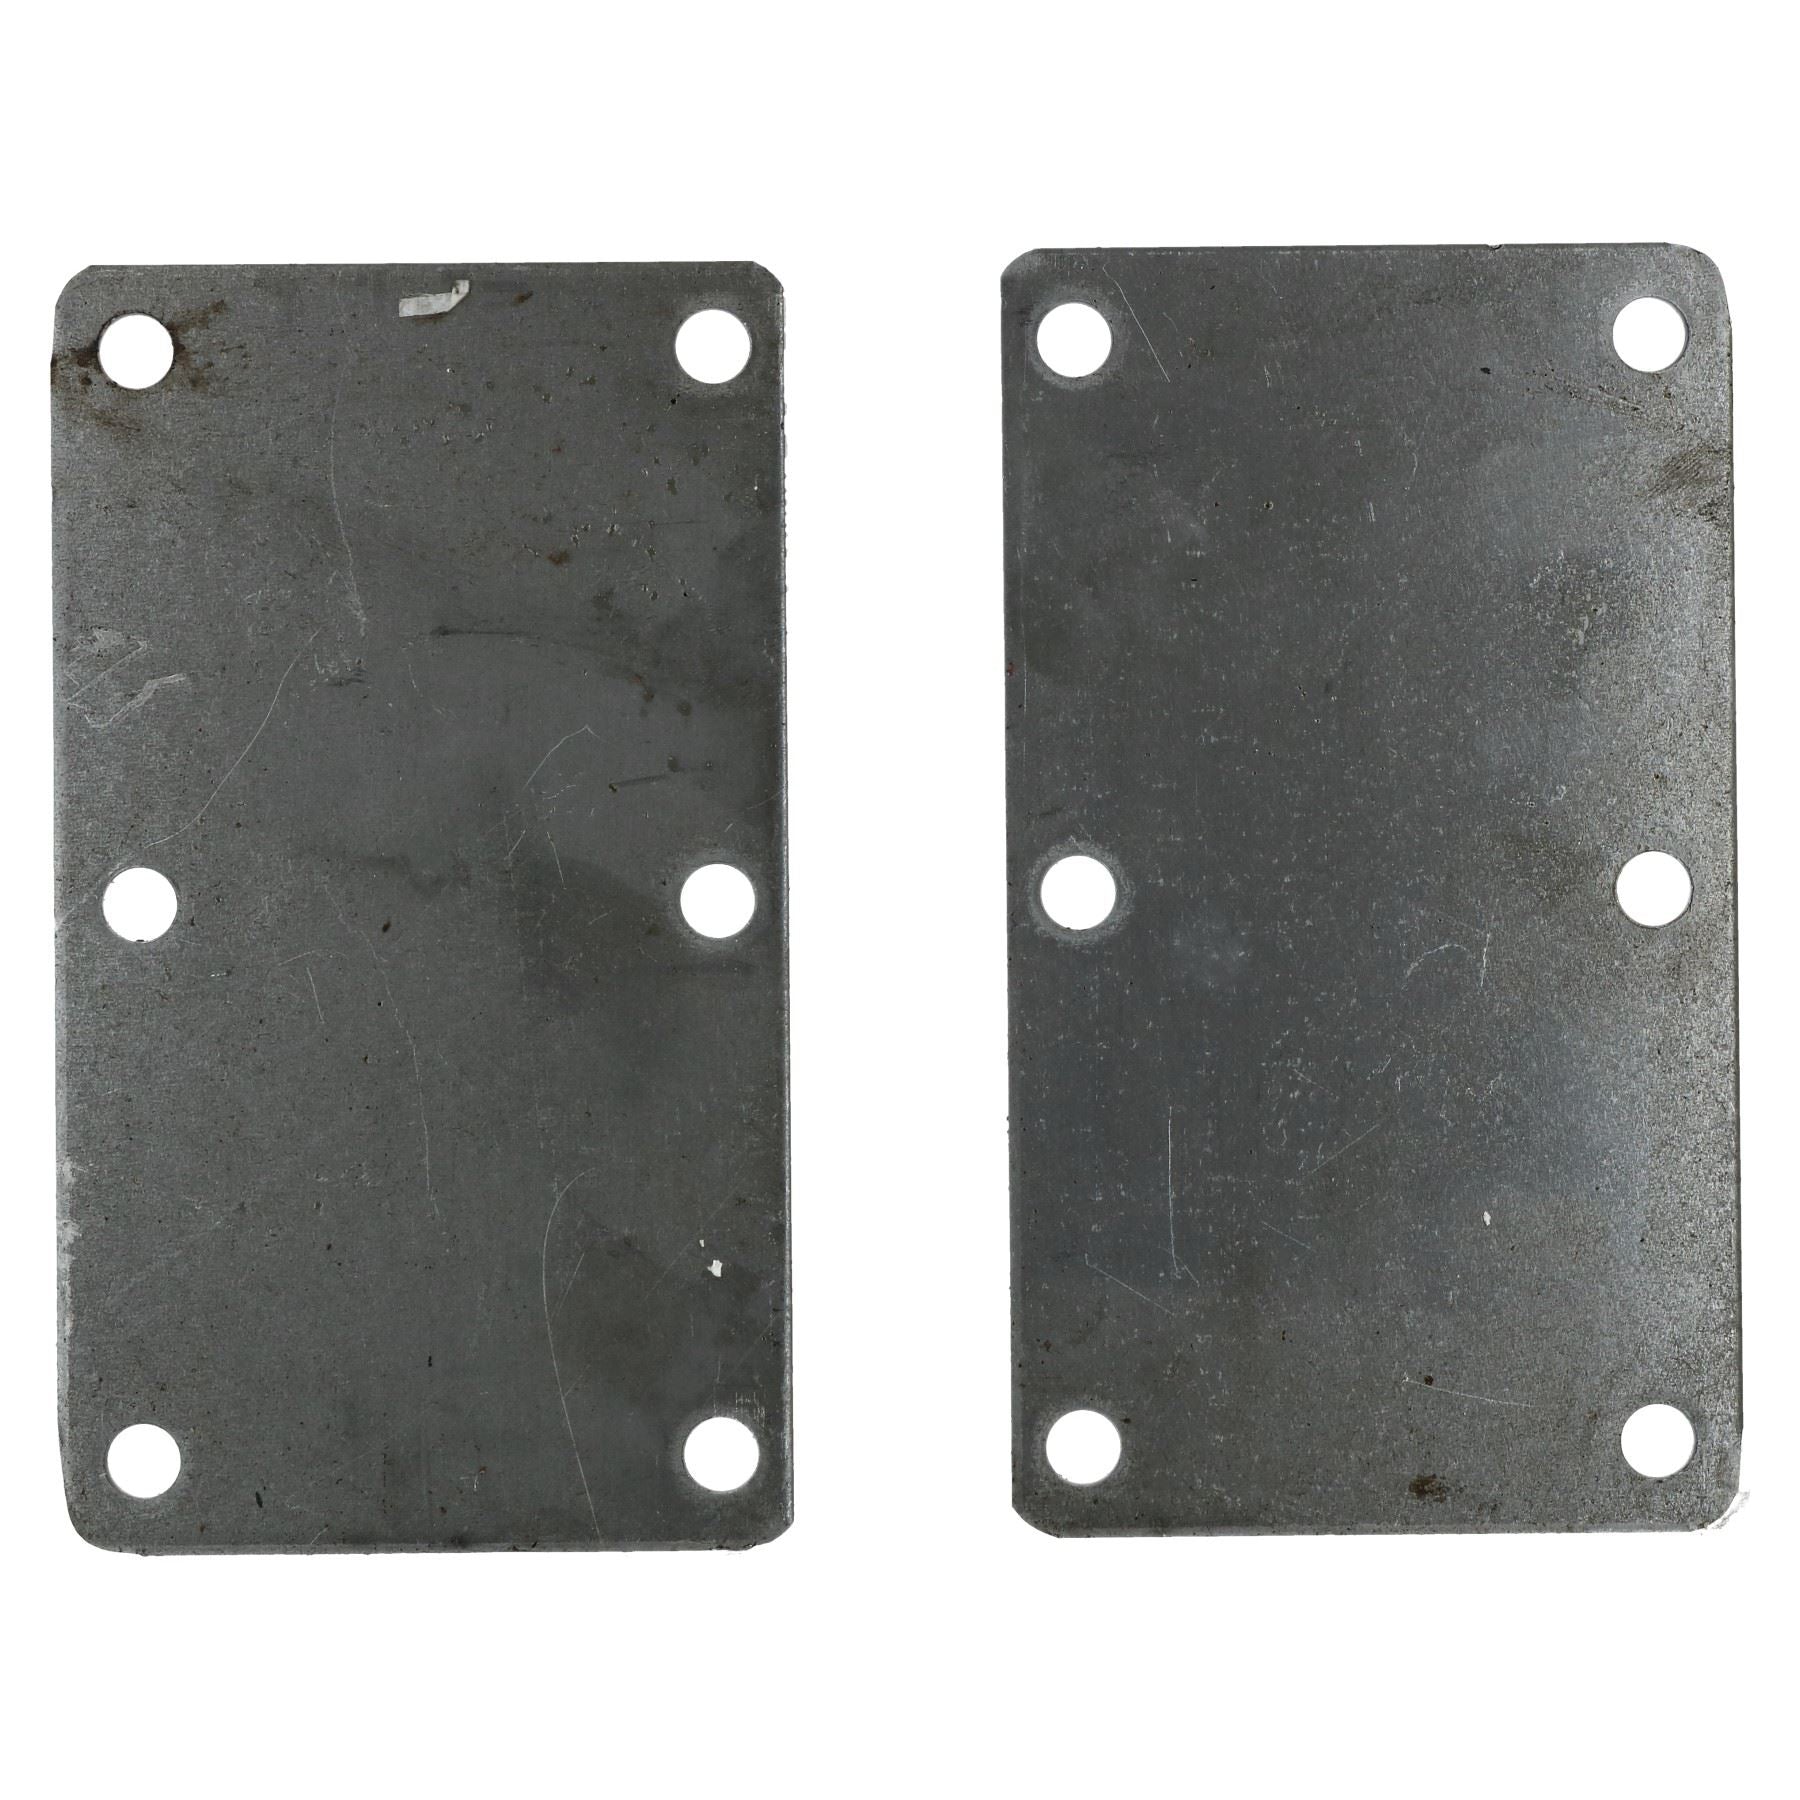 350KG & 500KG Mounting Plate (Pair) Suspension Welding On Plate 6 Hole